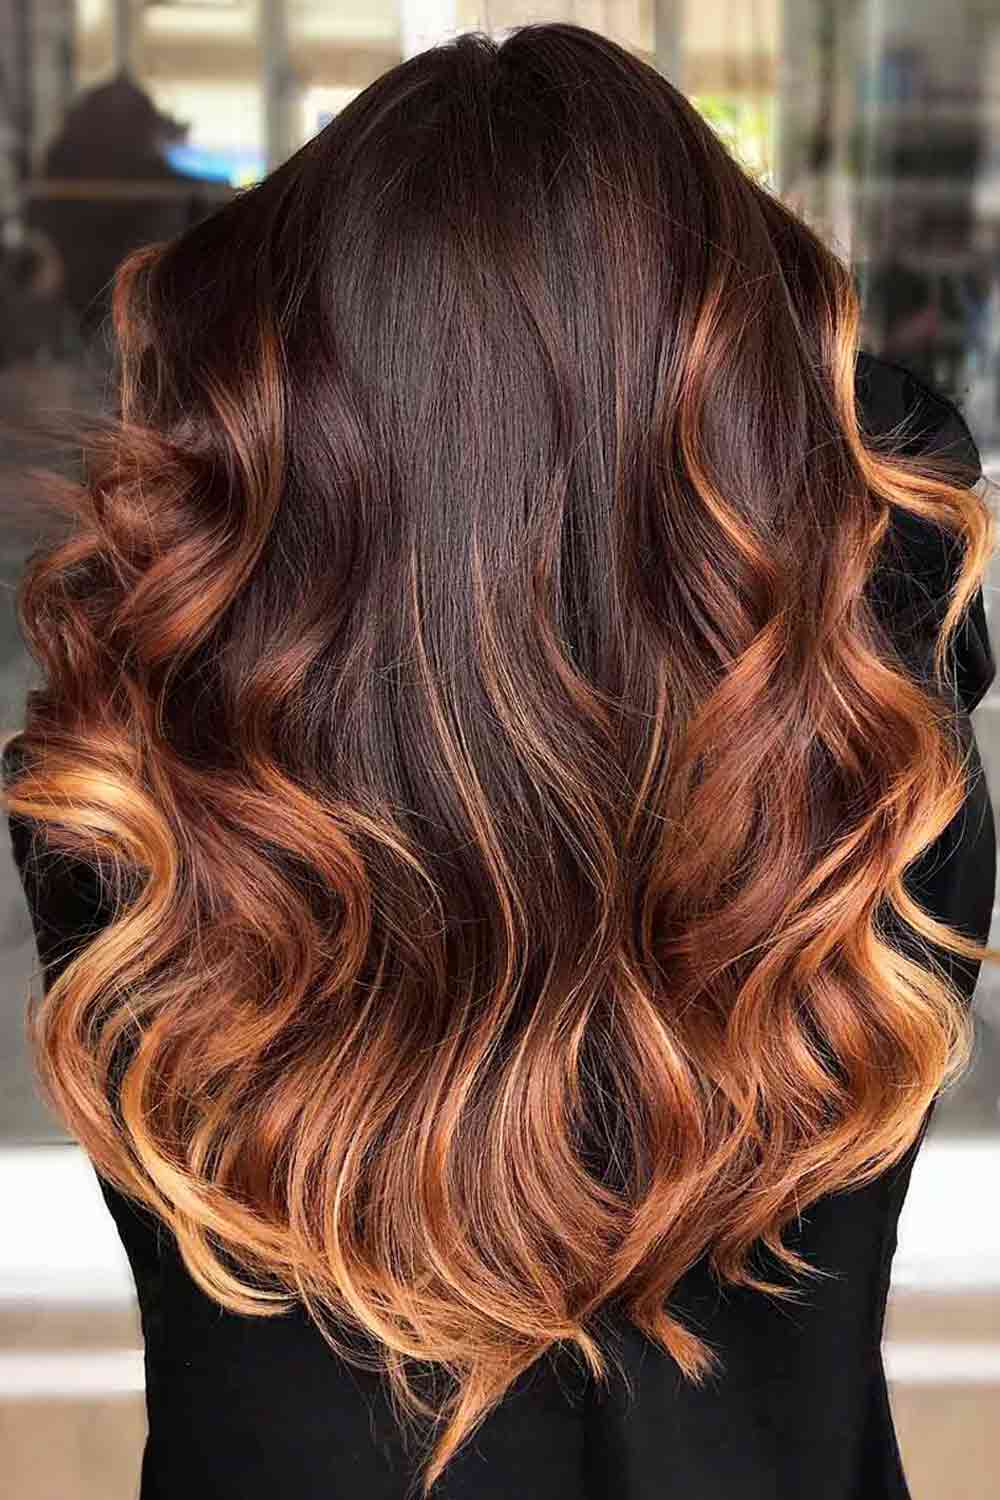 Caramel Balayage with Bleached Ends Hair #mediumhairbalayage #balayagehairstyles #mediumhair #balayage